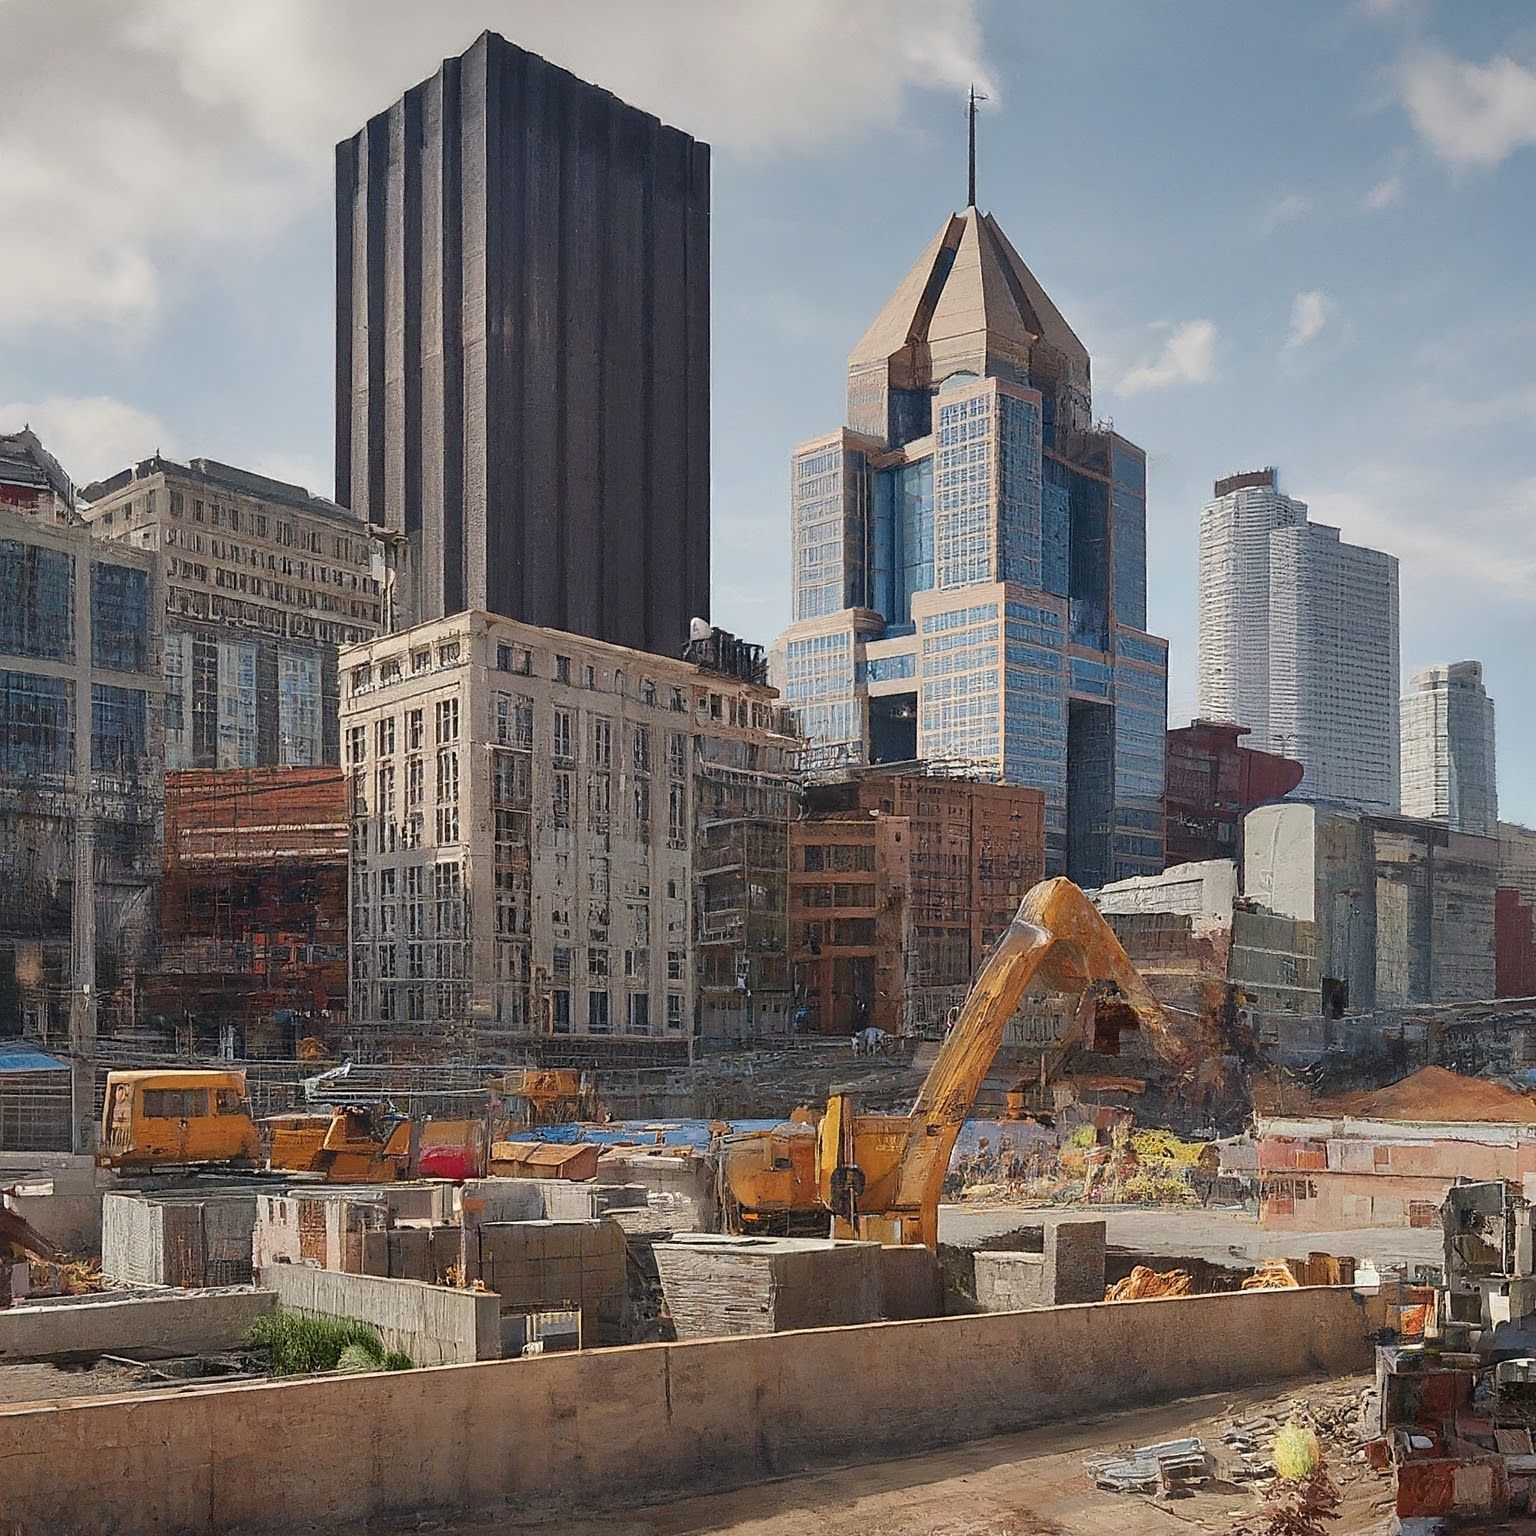 Construction site with excavators and retaining walls in downtown Pittsburgh, with skyscrapers under blue sky in the background